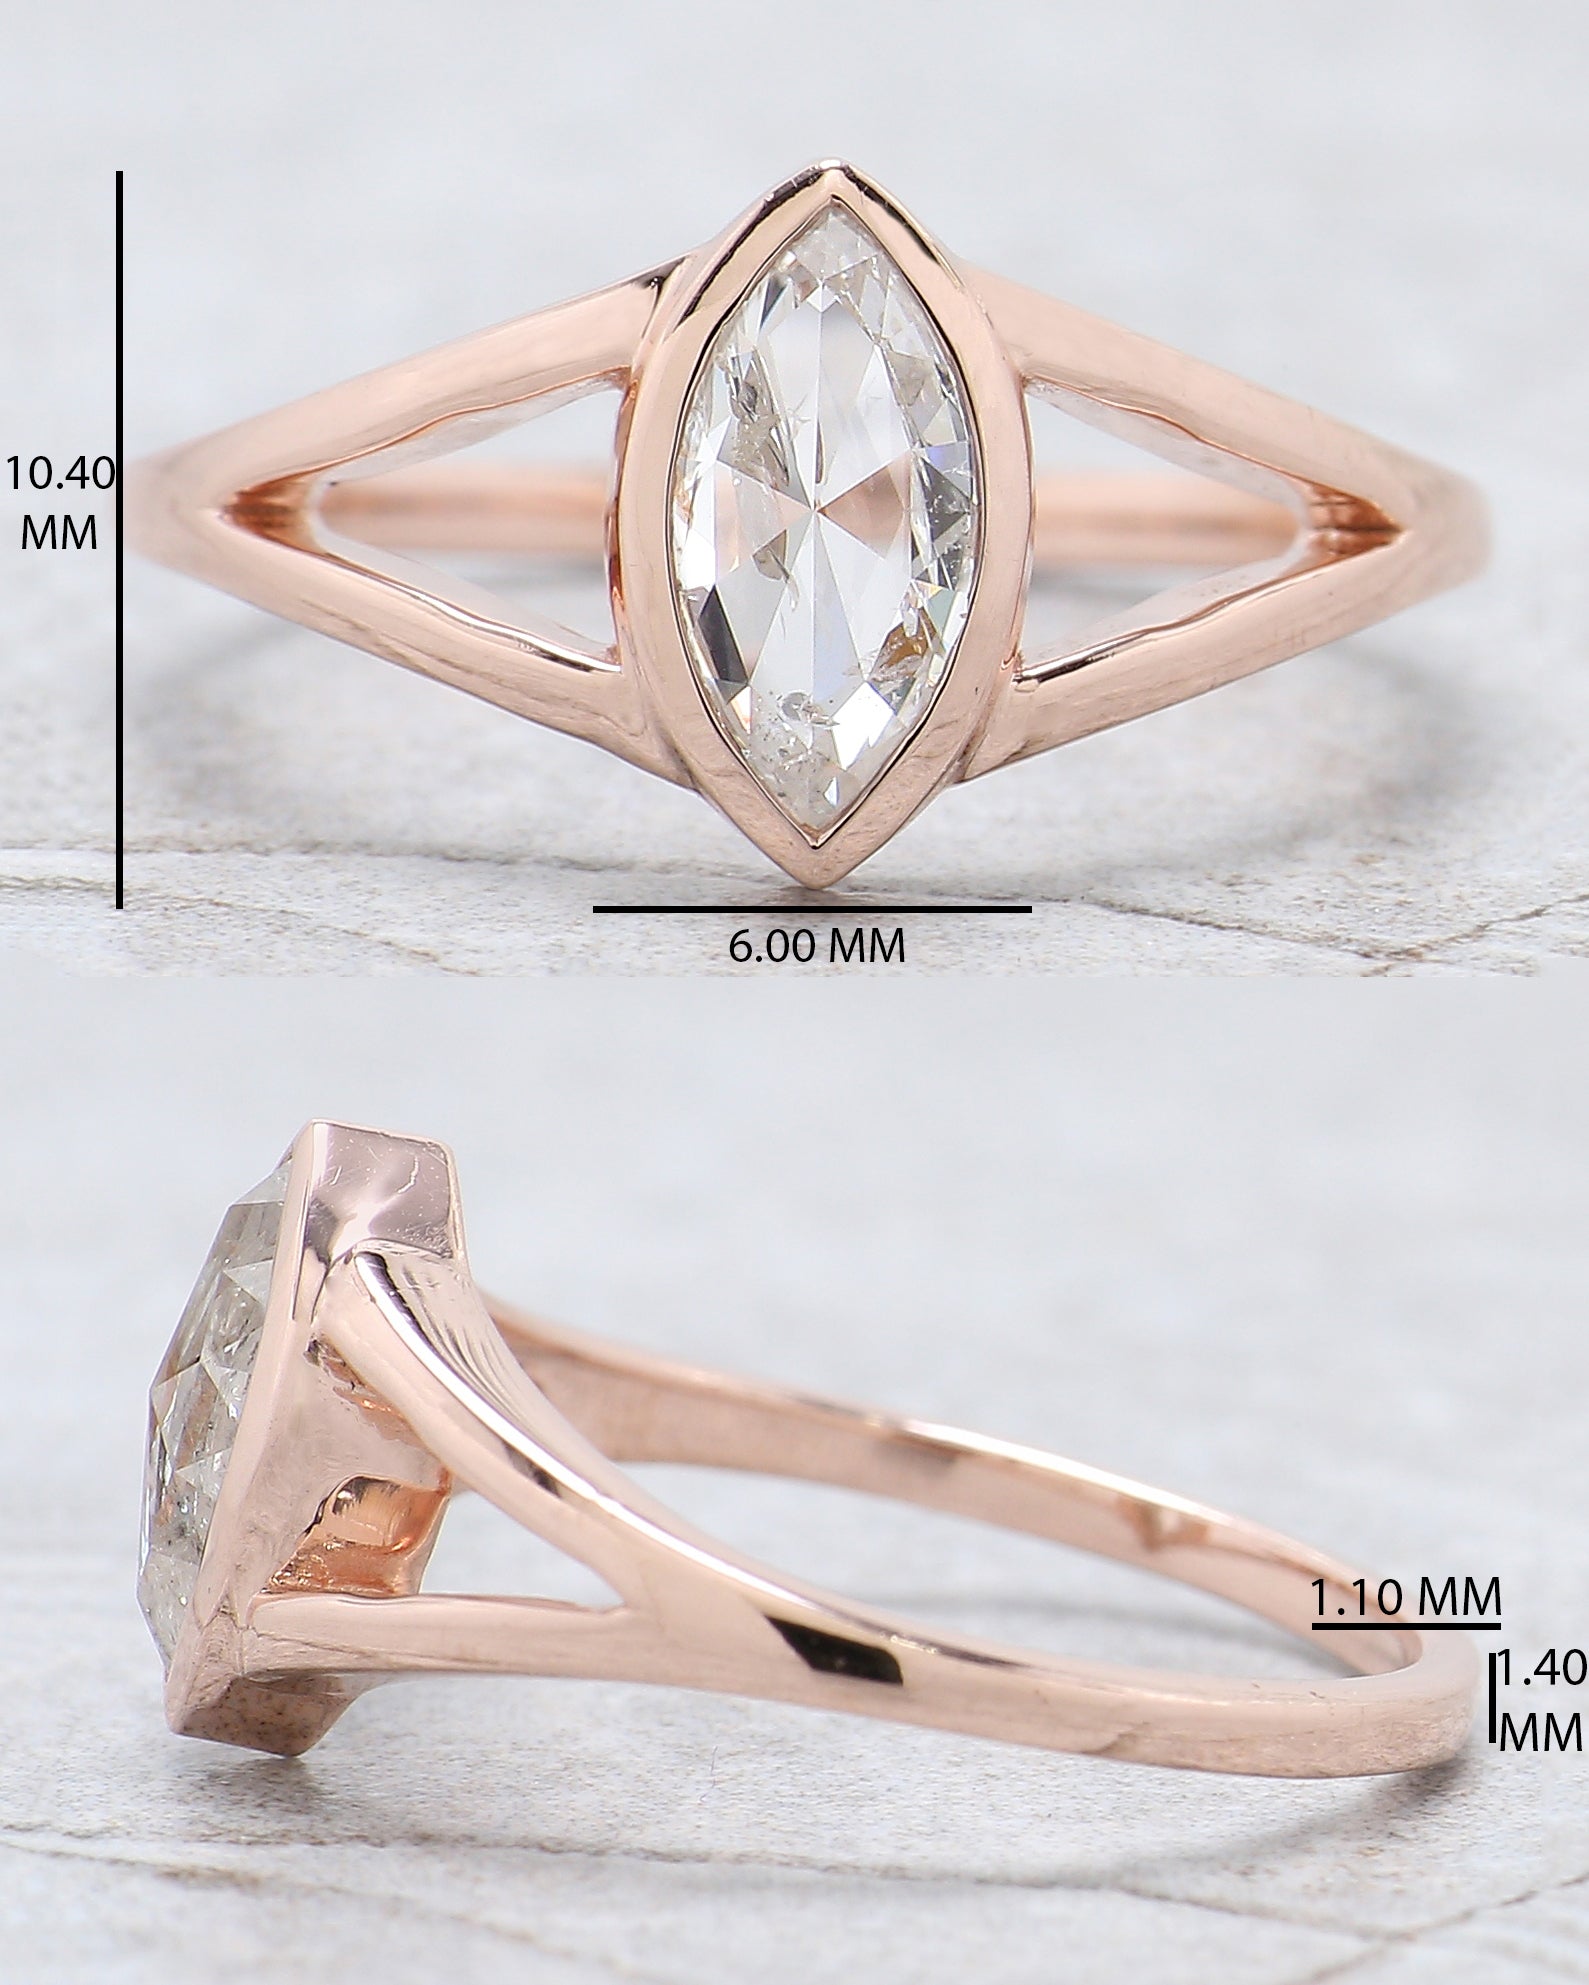 Marquise Cut Salt And Pepper Diamond Ring 0.87 Ct 8.86 MM Marquise Diamond Ring 14K Rose Gold Silver Engagement Ring Gift For Her QL2685